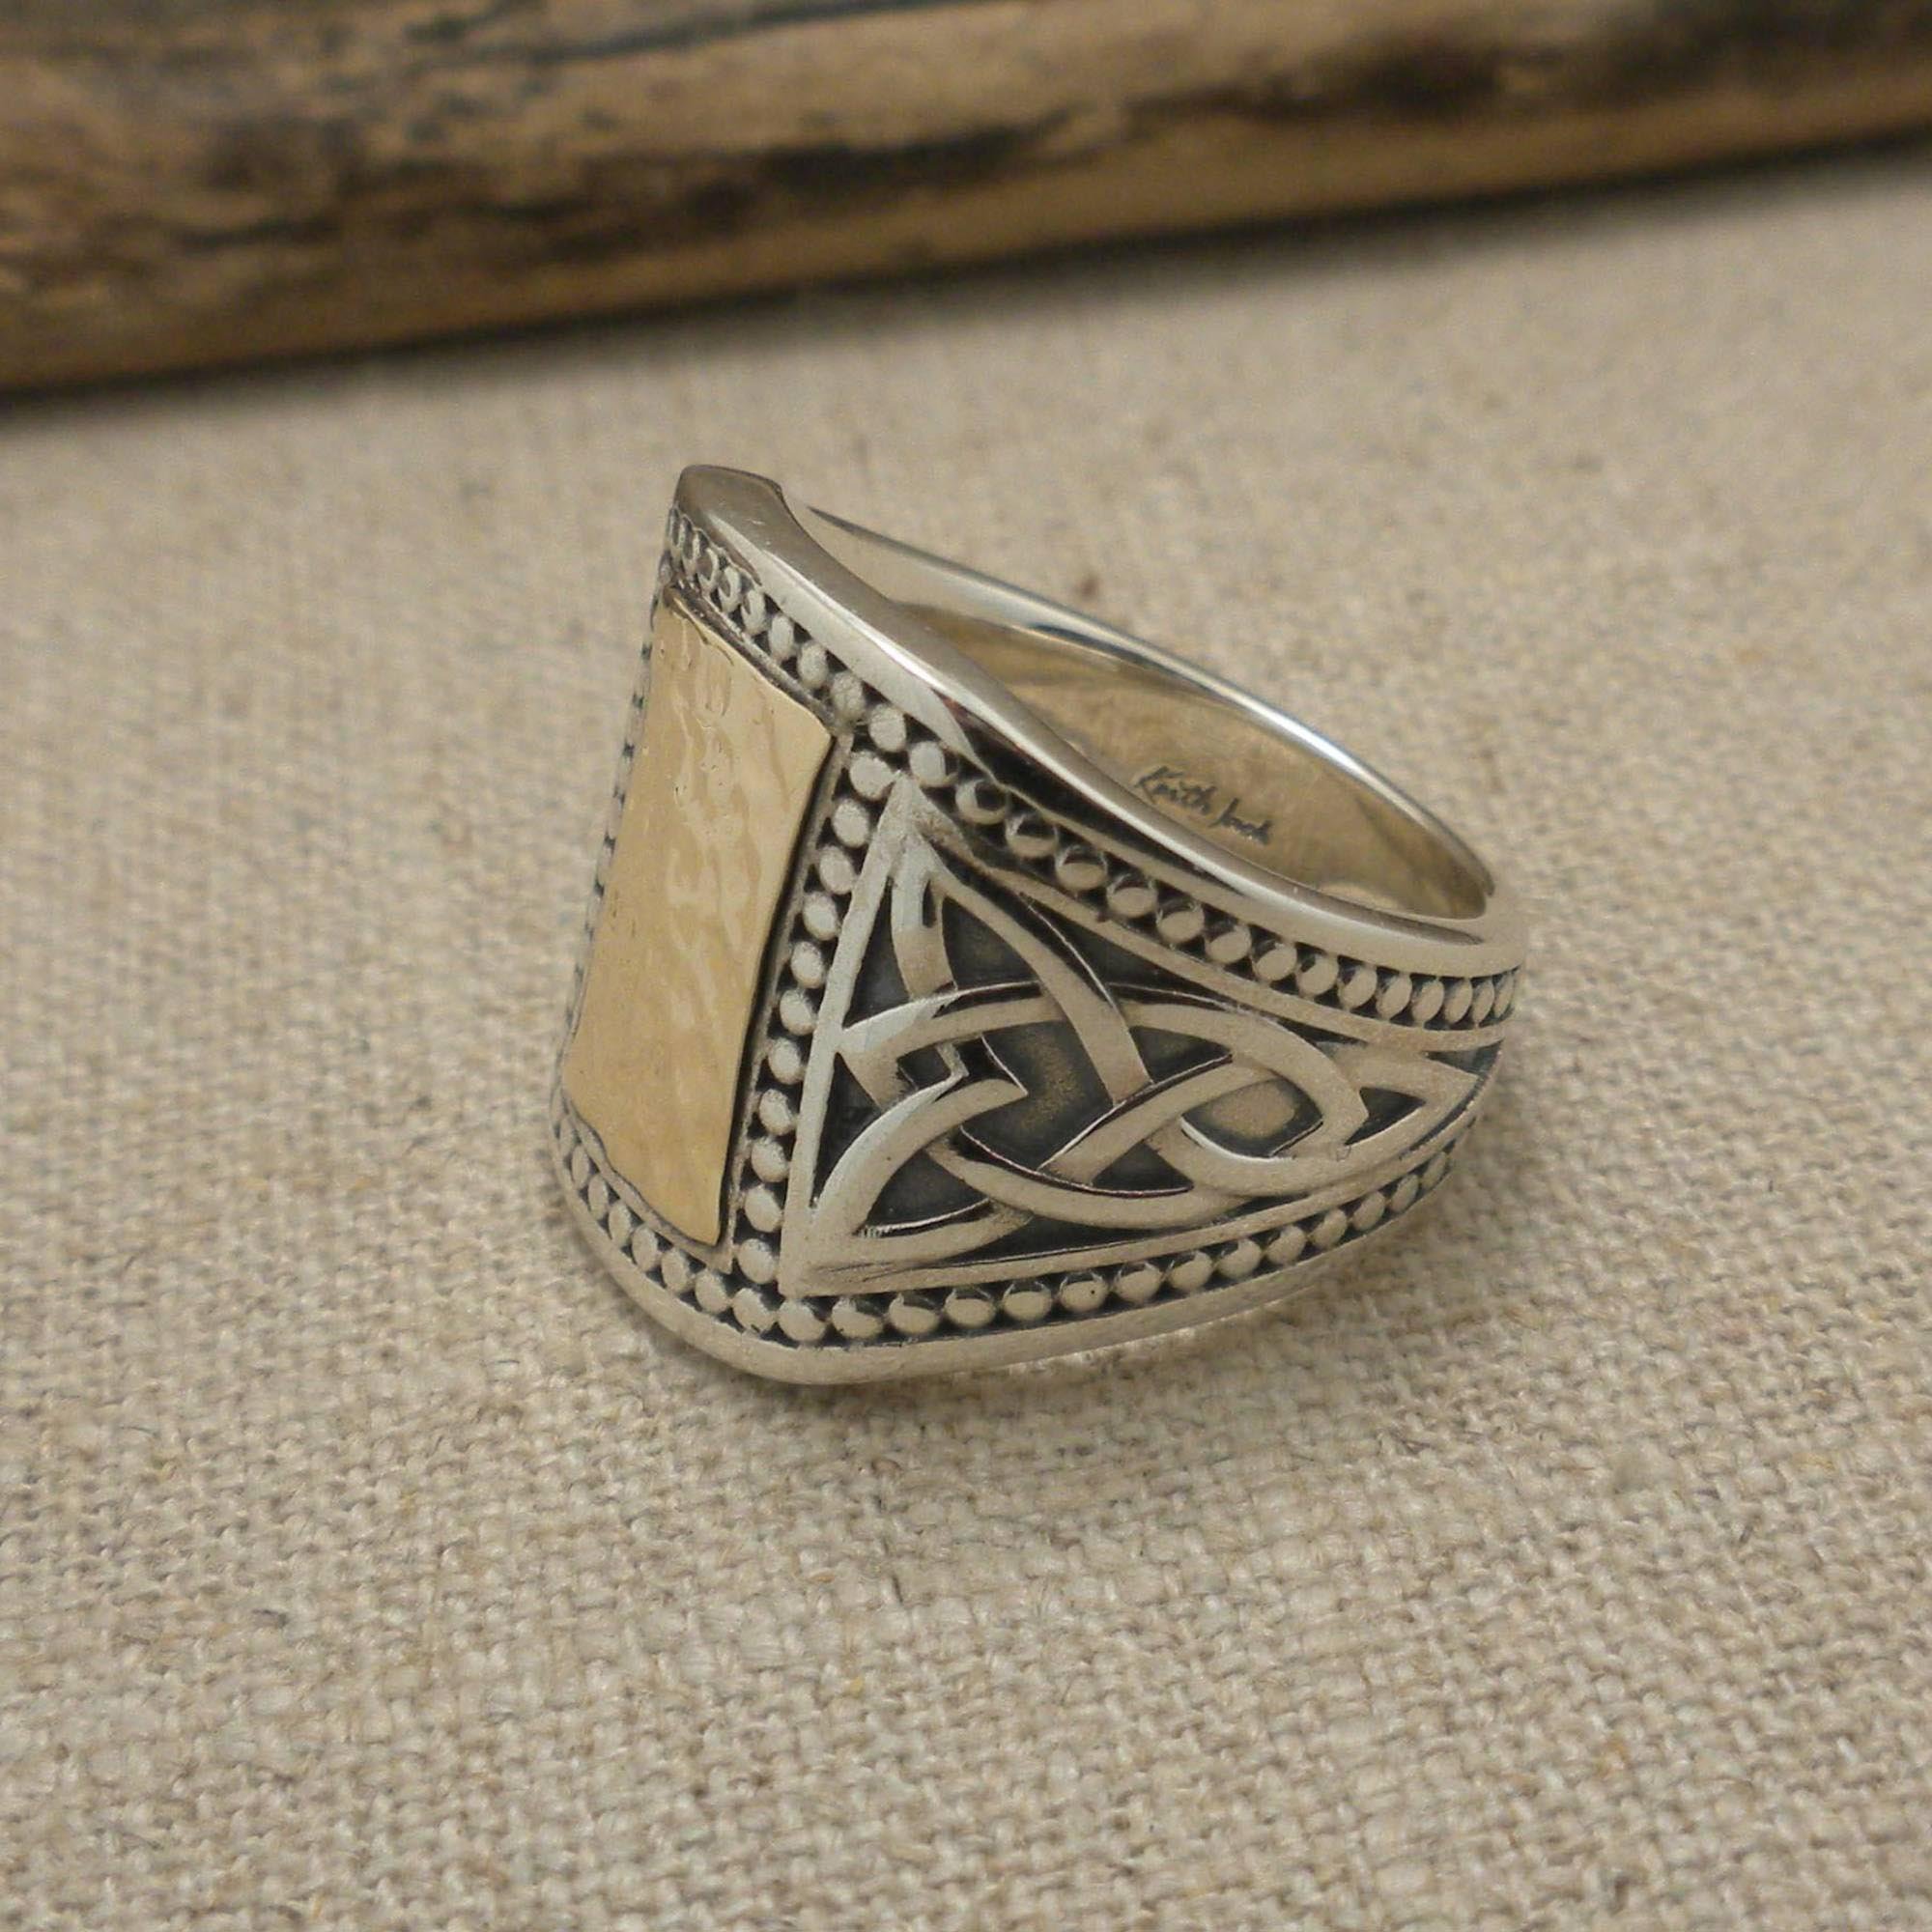 Keith Jack Signet ring with 10K Hammered Center